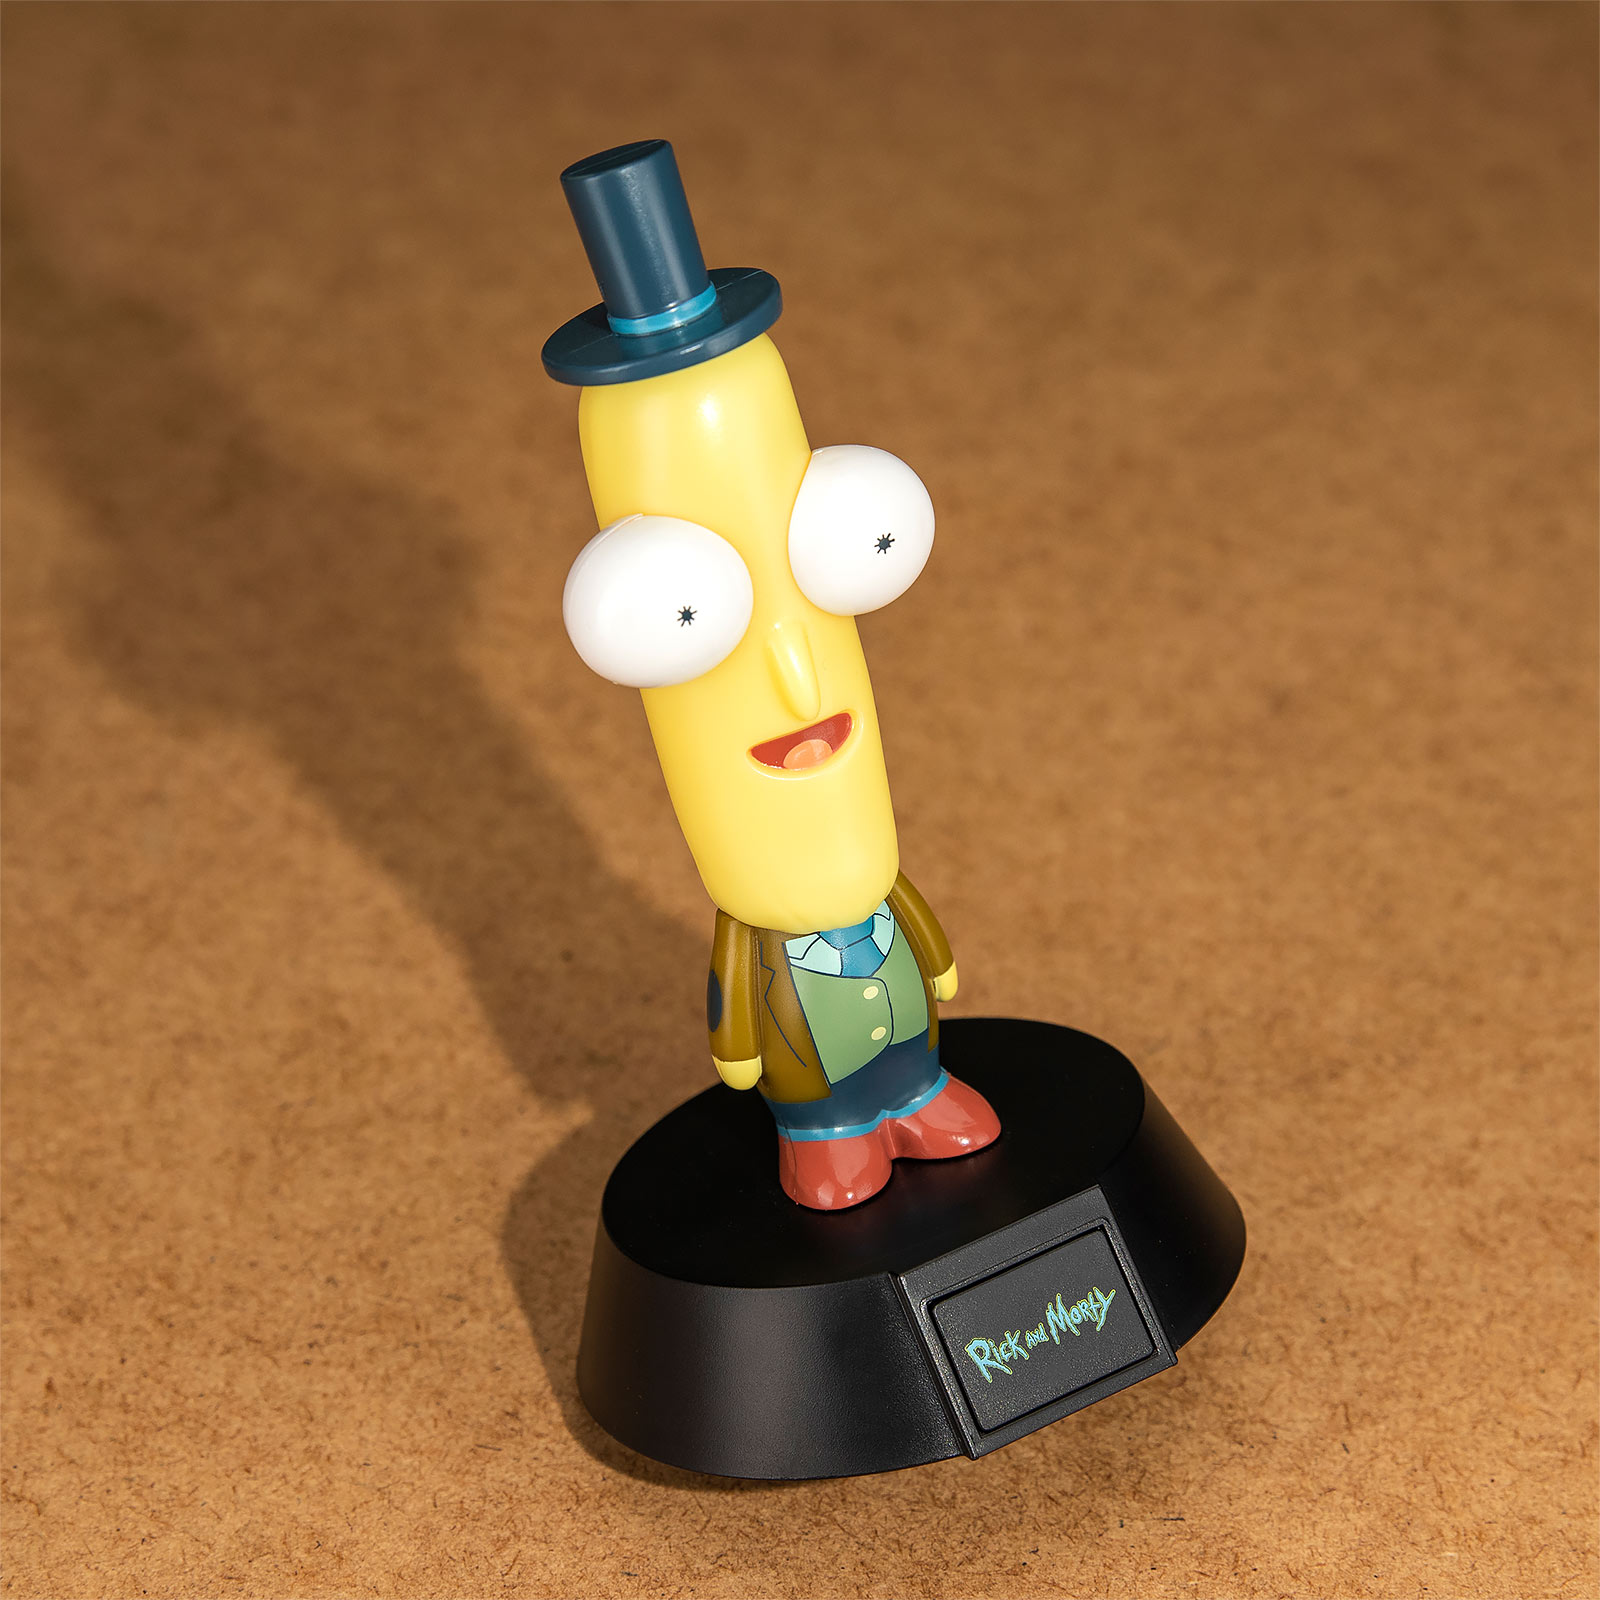 Rick and Morty - Mr. Poopybutthole Icons 3D Lampe de table